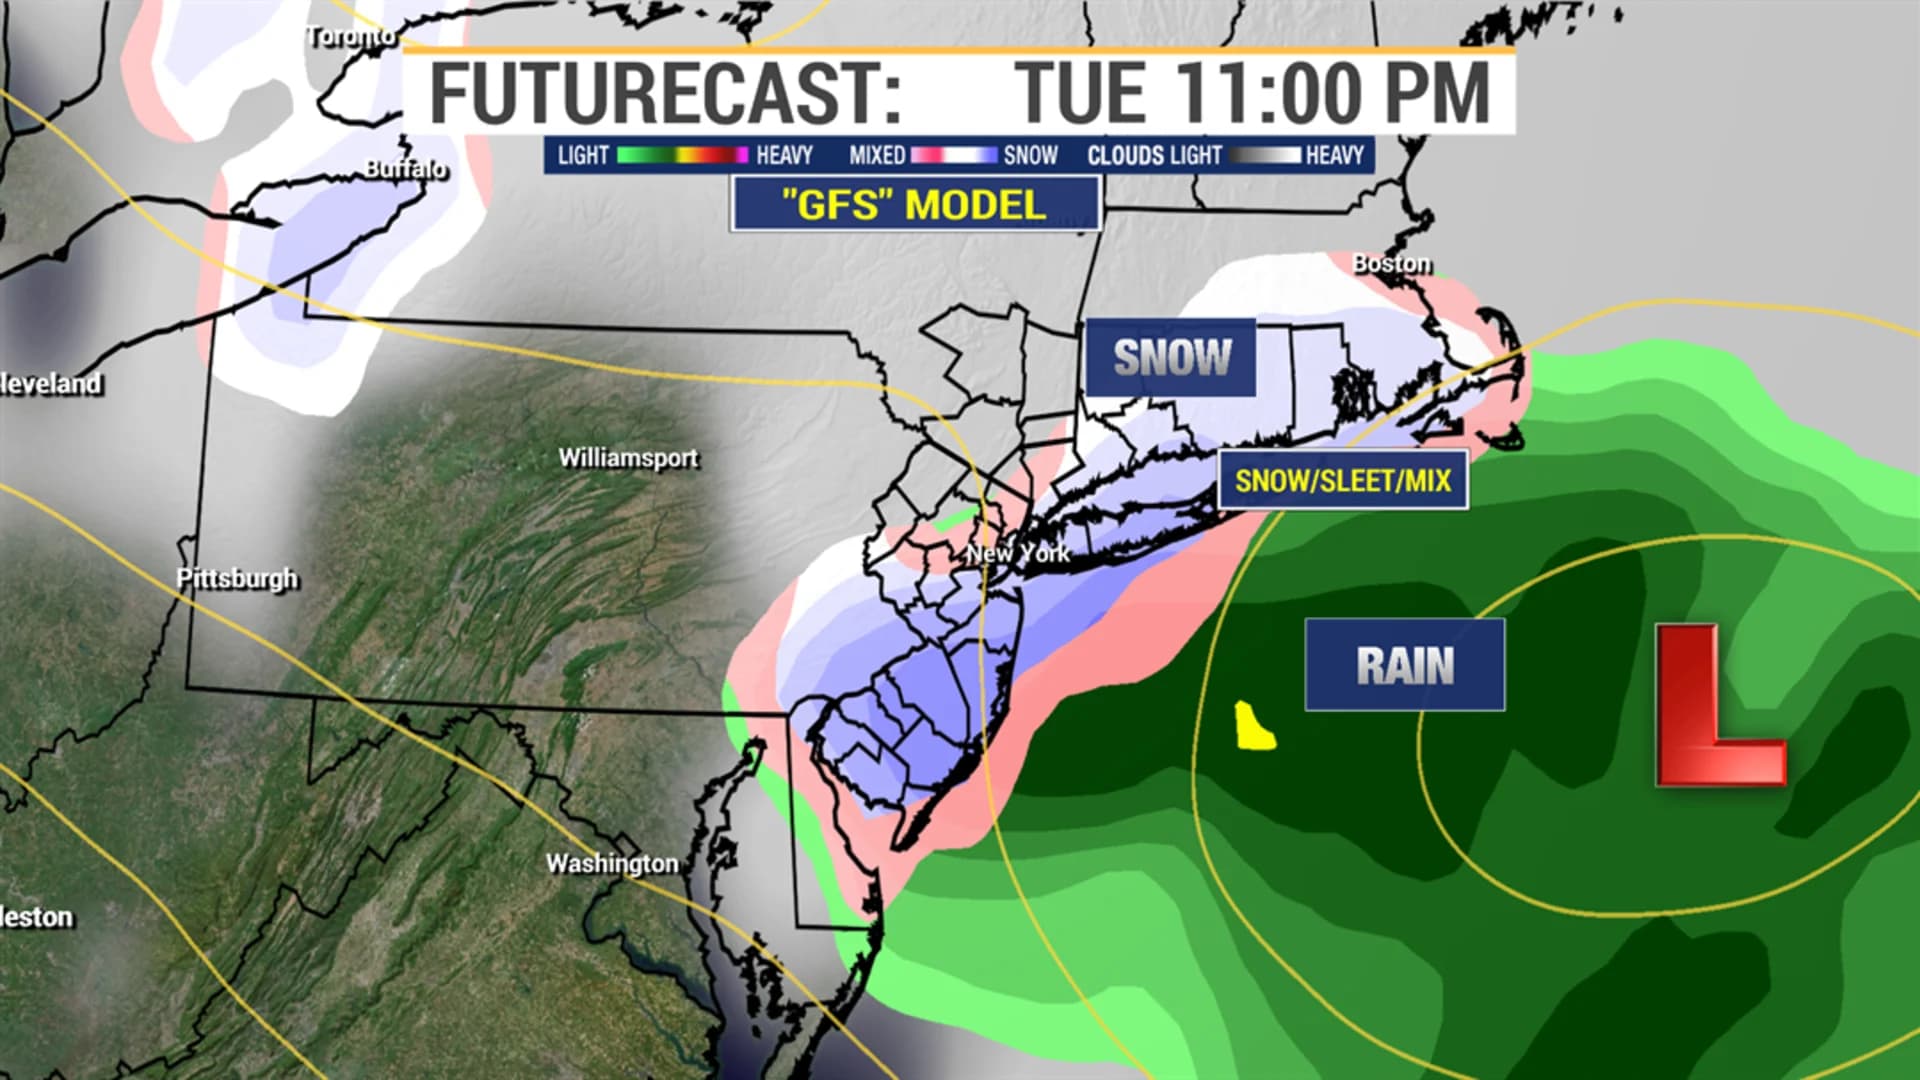 NYC may see wintry mix, wet snow overnight into Wednesday